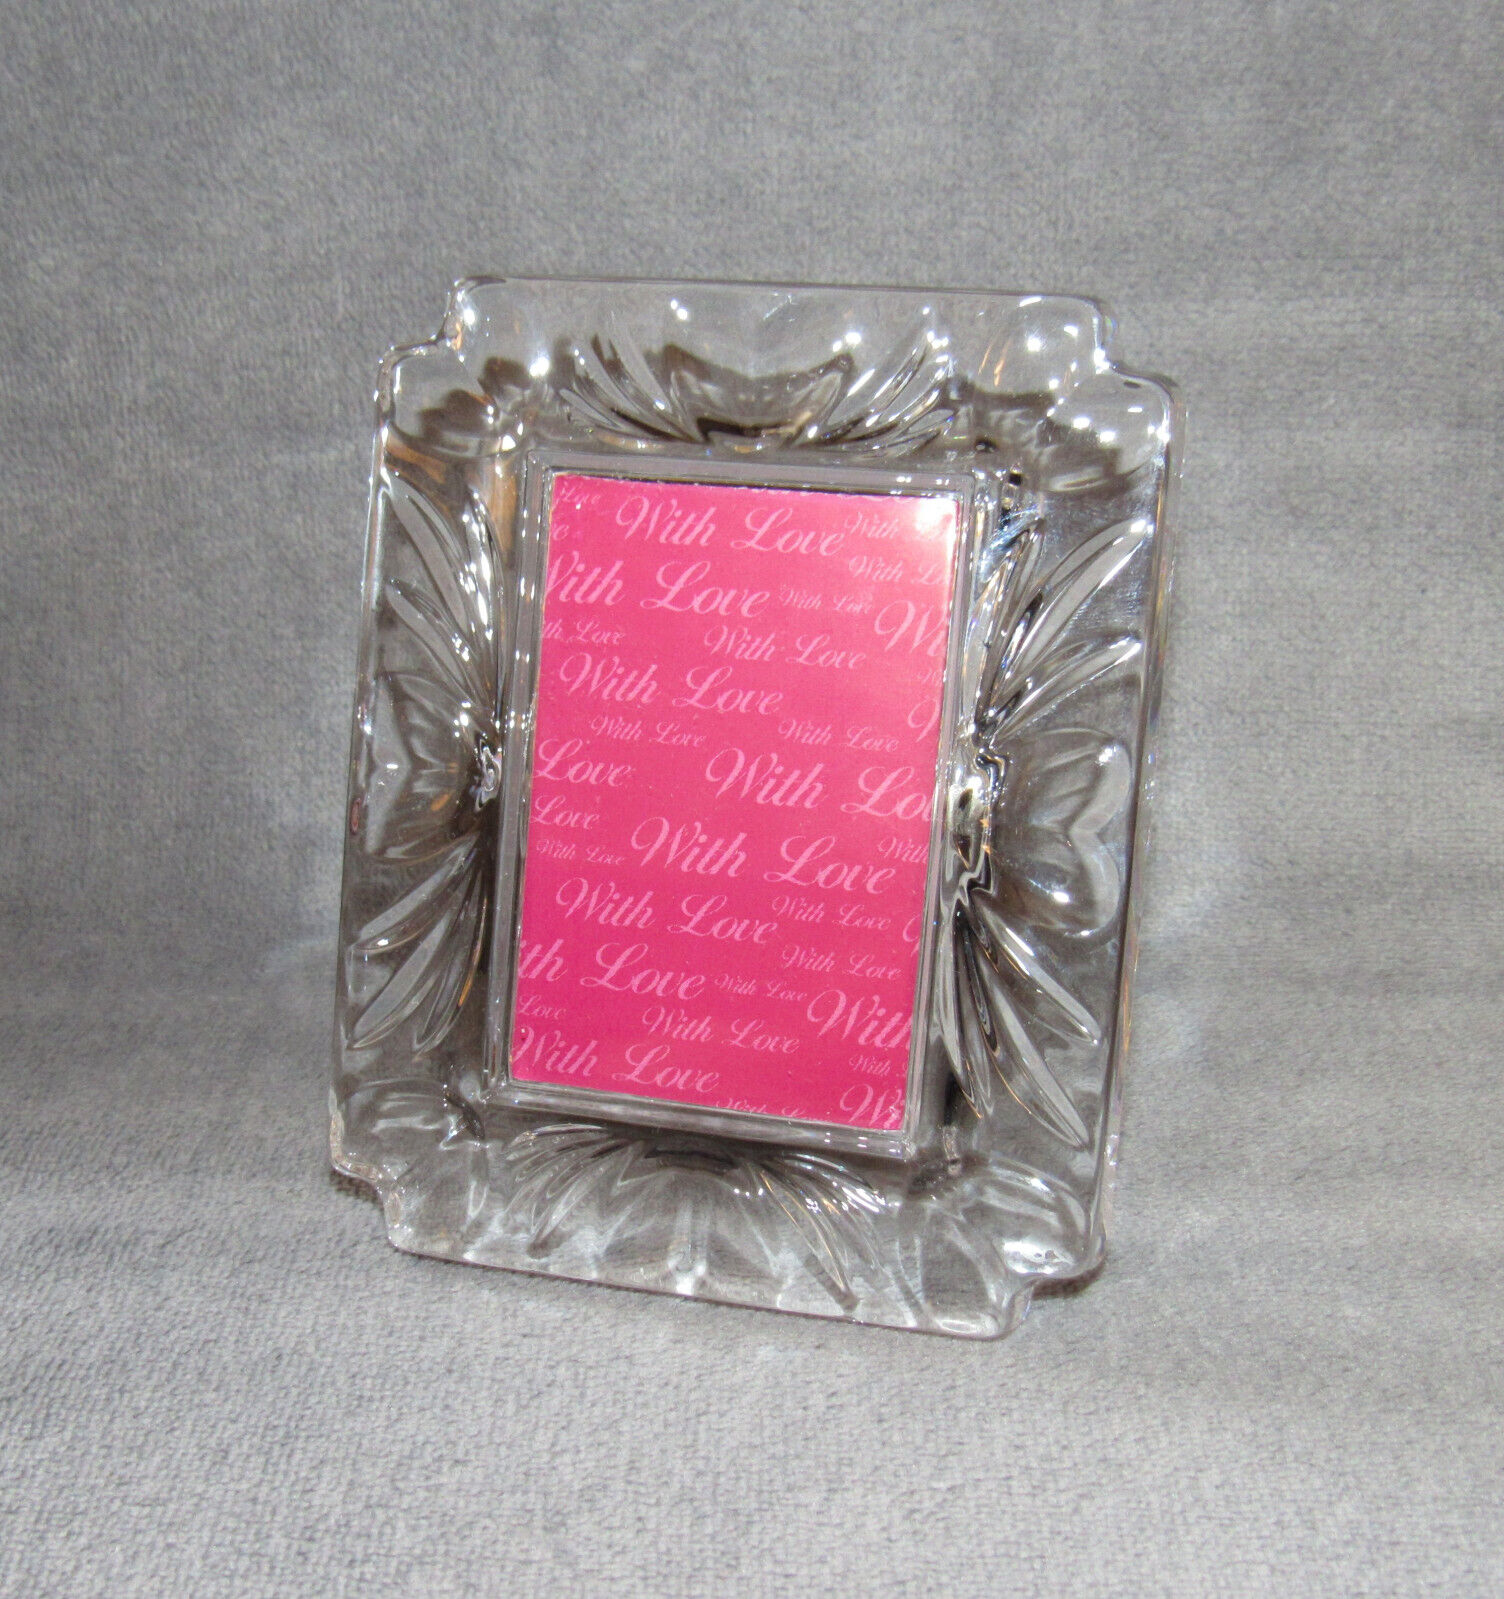 WATERFORD CRYSTAL – With Love – Hearts Design Photo Frame – Signed Fred Curtis